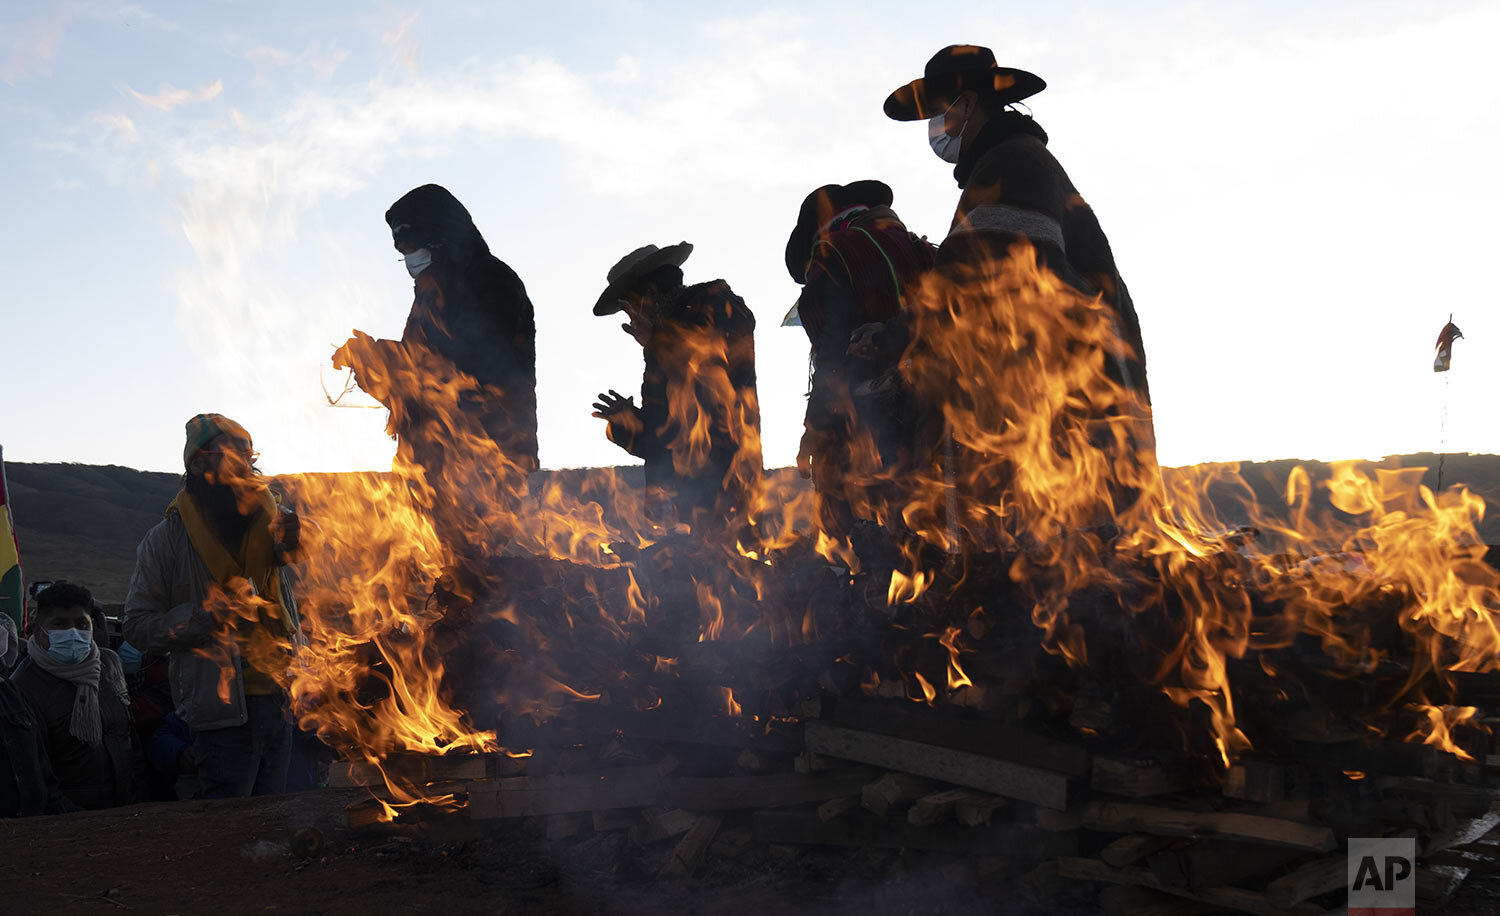  Aymara Indigenous religious leaders finish a new year's ritual in the ancient city of Tiwanaku, Bolivia, June 21, 2021. The Aymara are celebrating the Andean New Year of 5,529 as well as the Southern Hemisphere's winter solstice. (AP Photo/Juan Kari